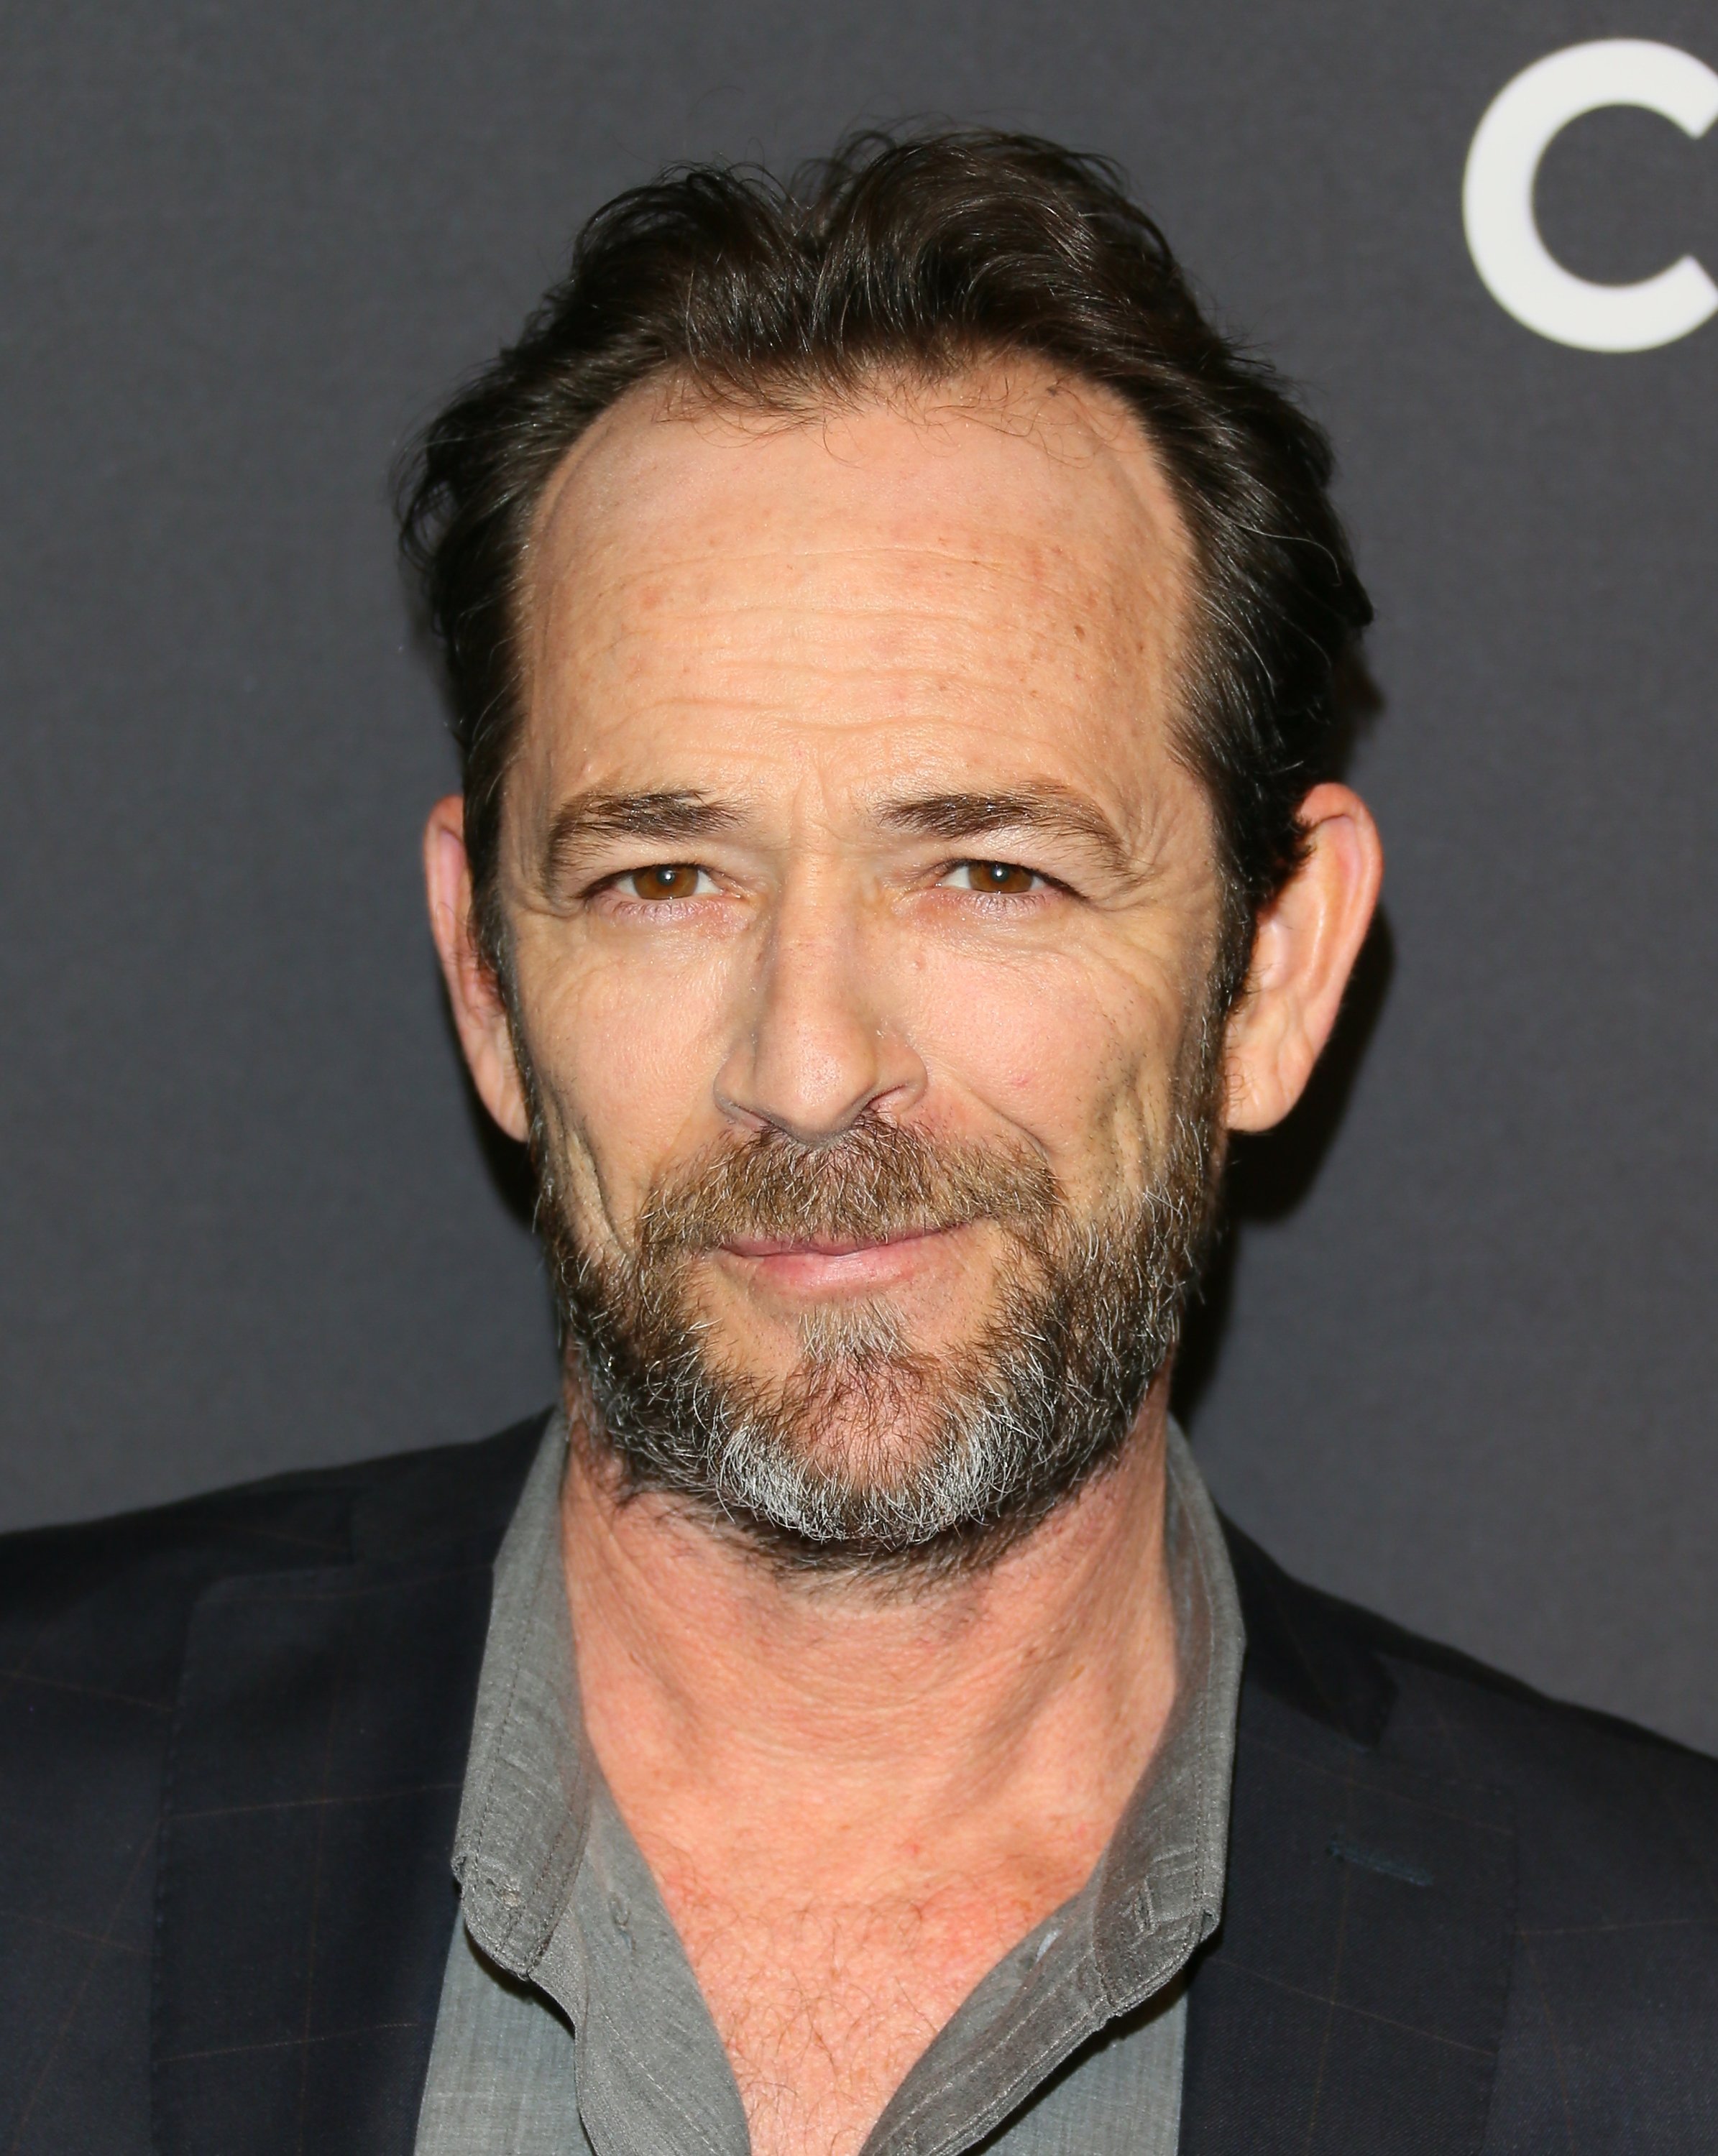 Luke Perry at The Paley Center For Media's 35th Annual PaleyFest Los Angeles - "Riverdale" on March 25, 2018, in Hollywood, California | Source: Getty Images